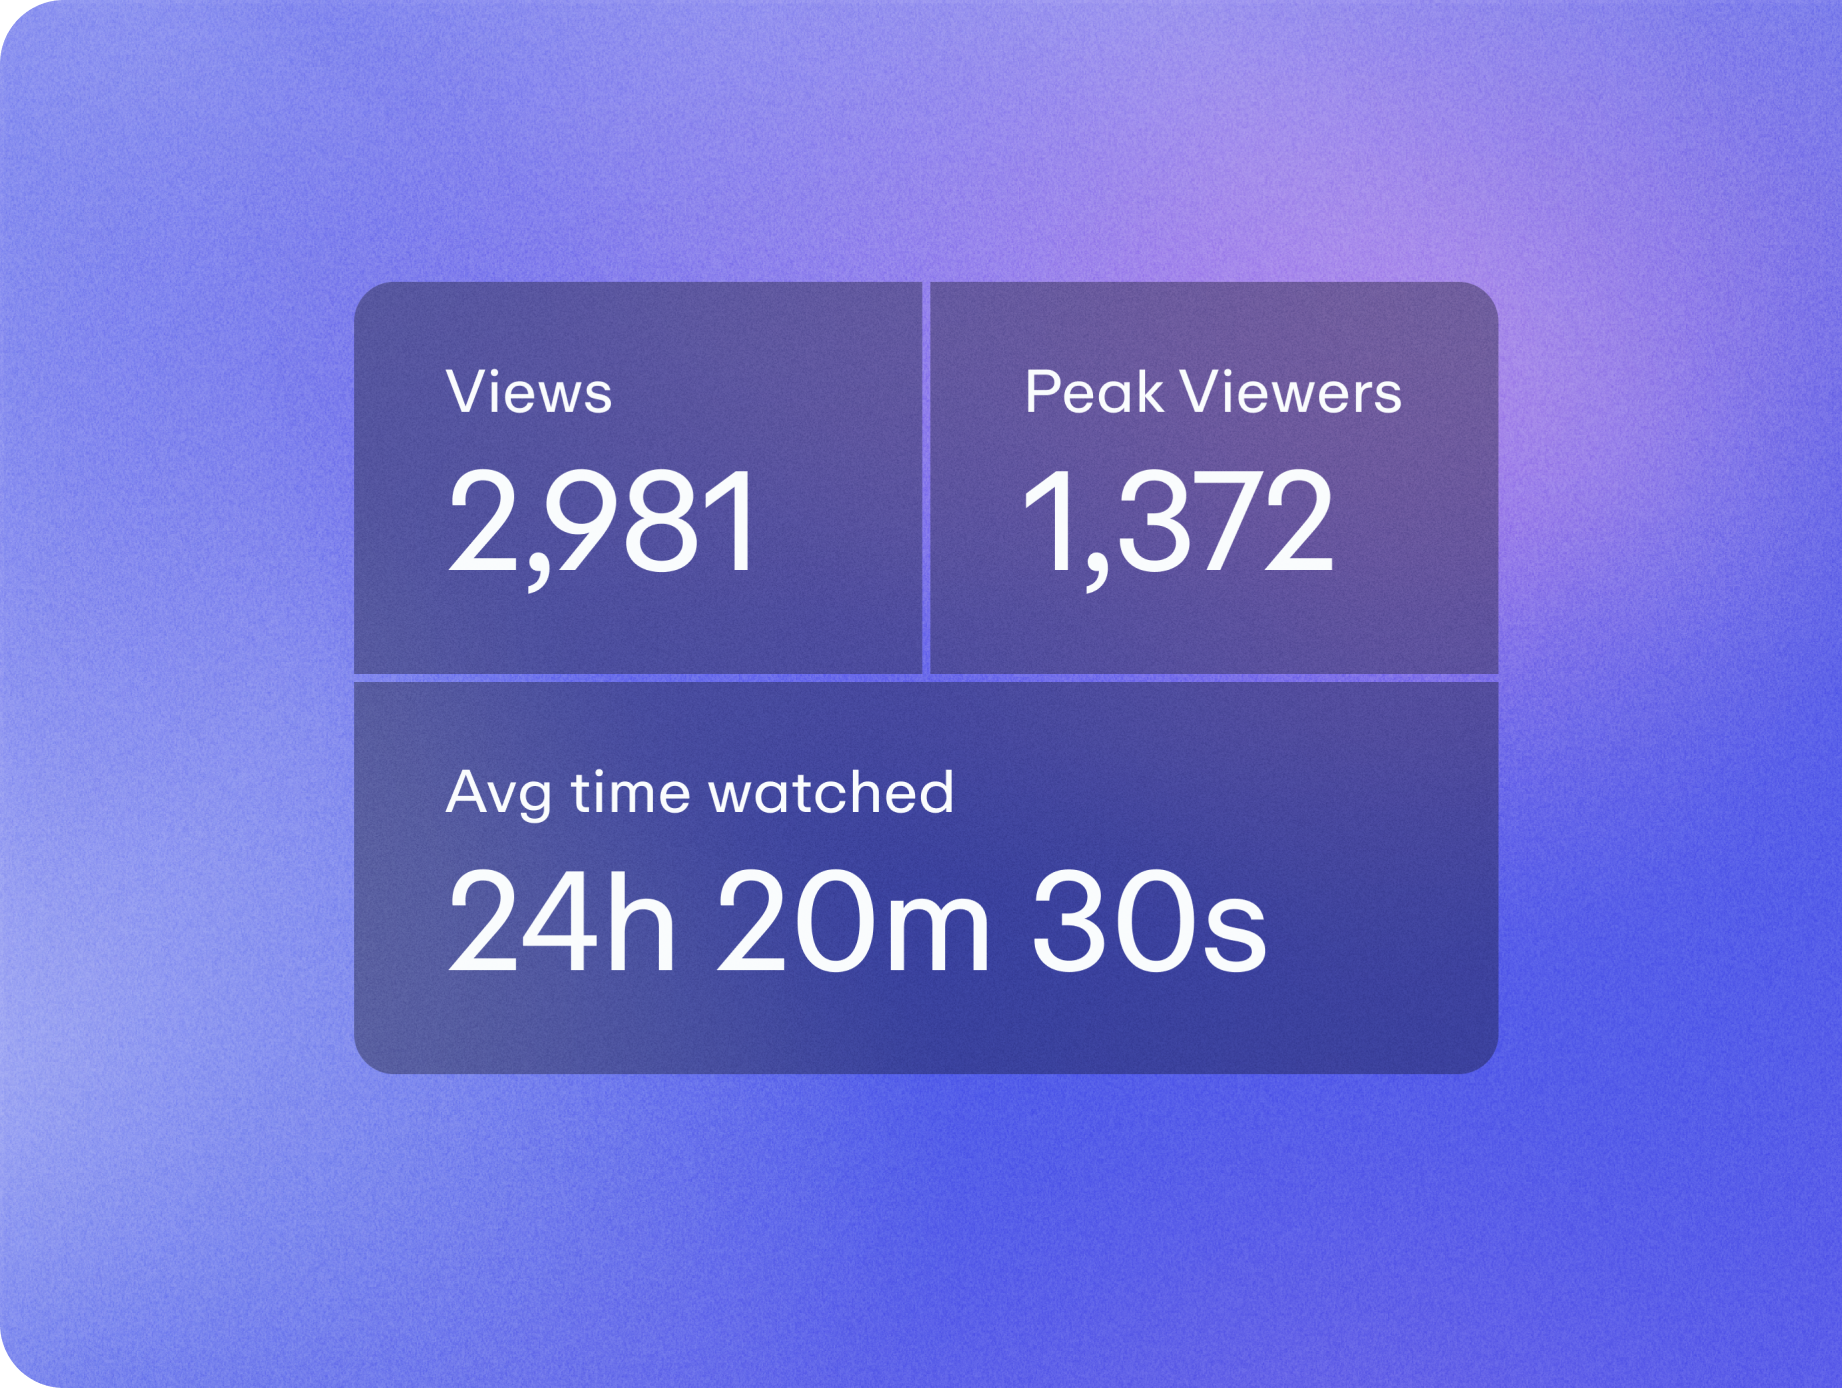 Video analytics showing how many people watched a tutorial video